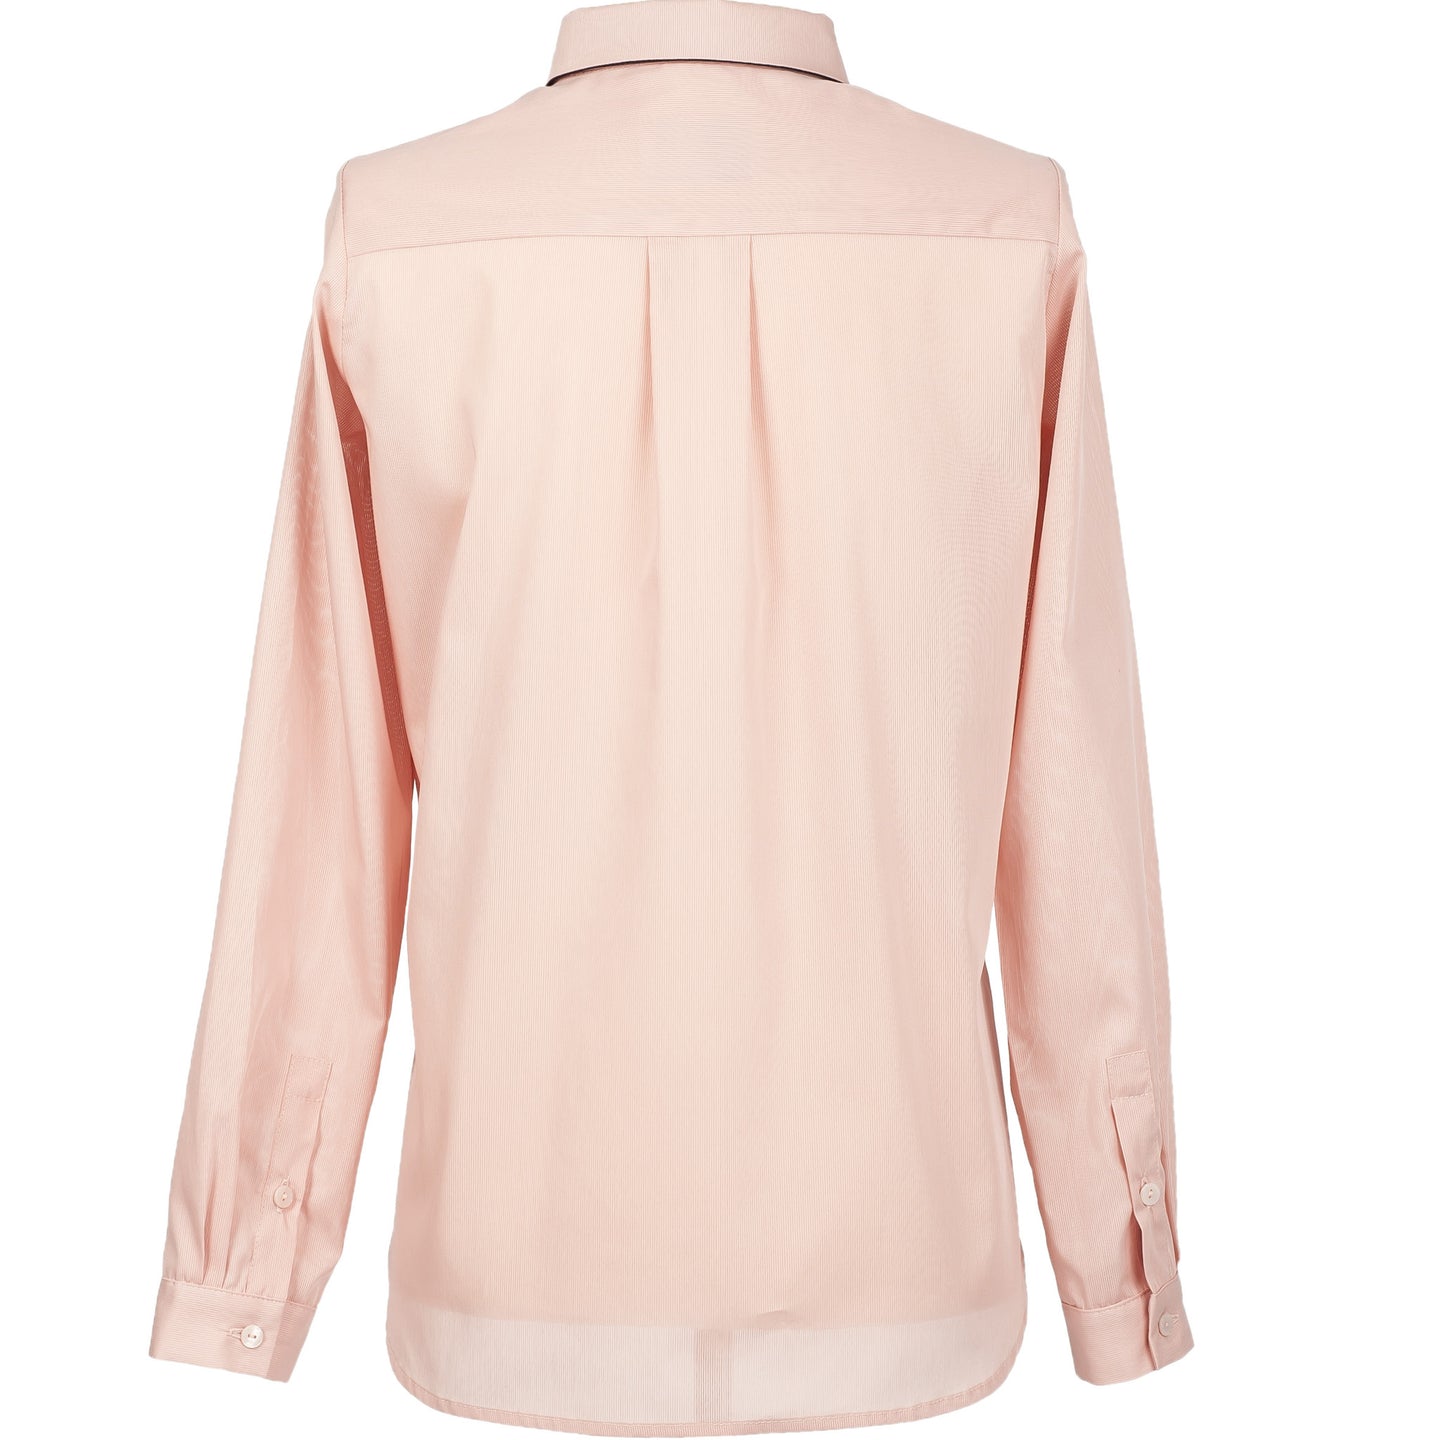 Casual blouse pink - Last size: 44